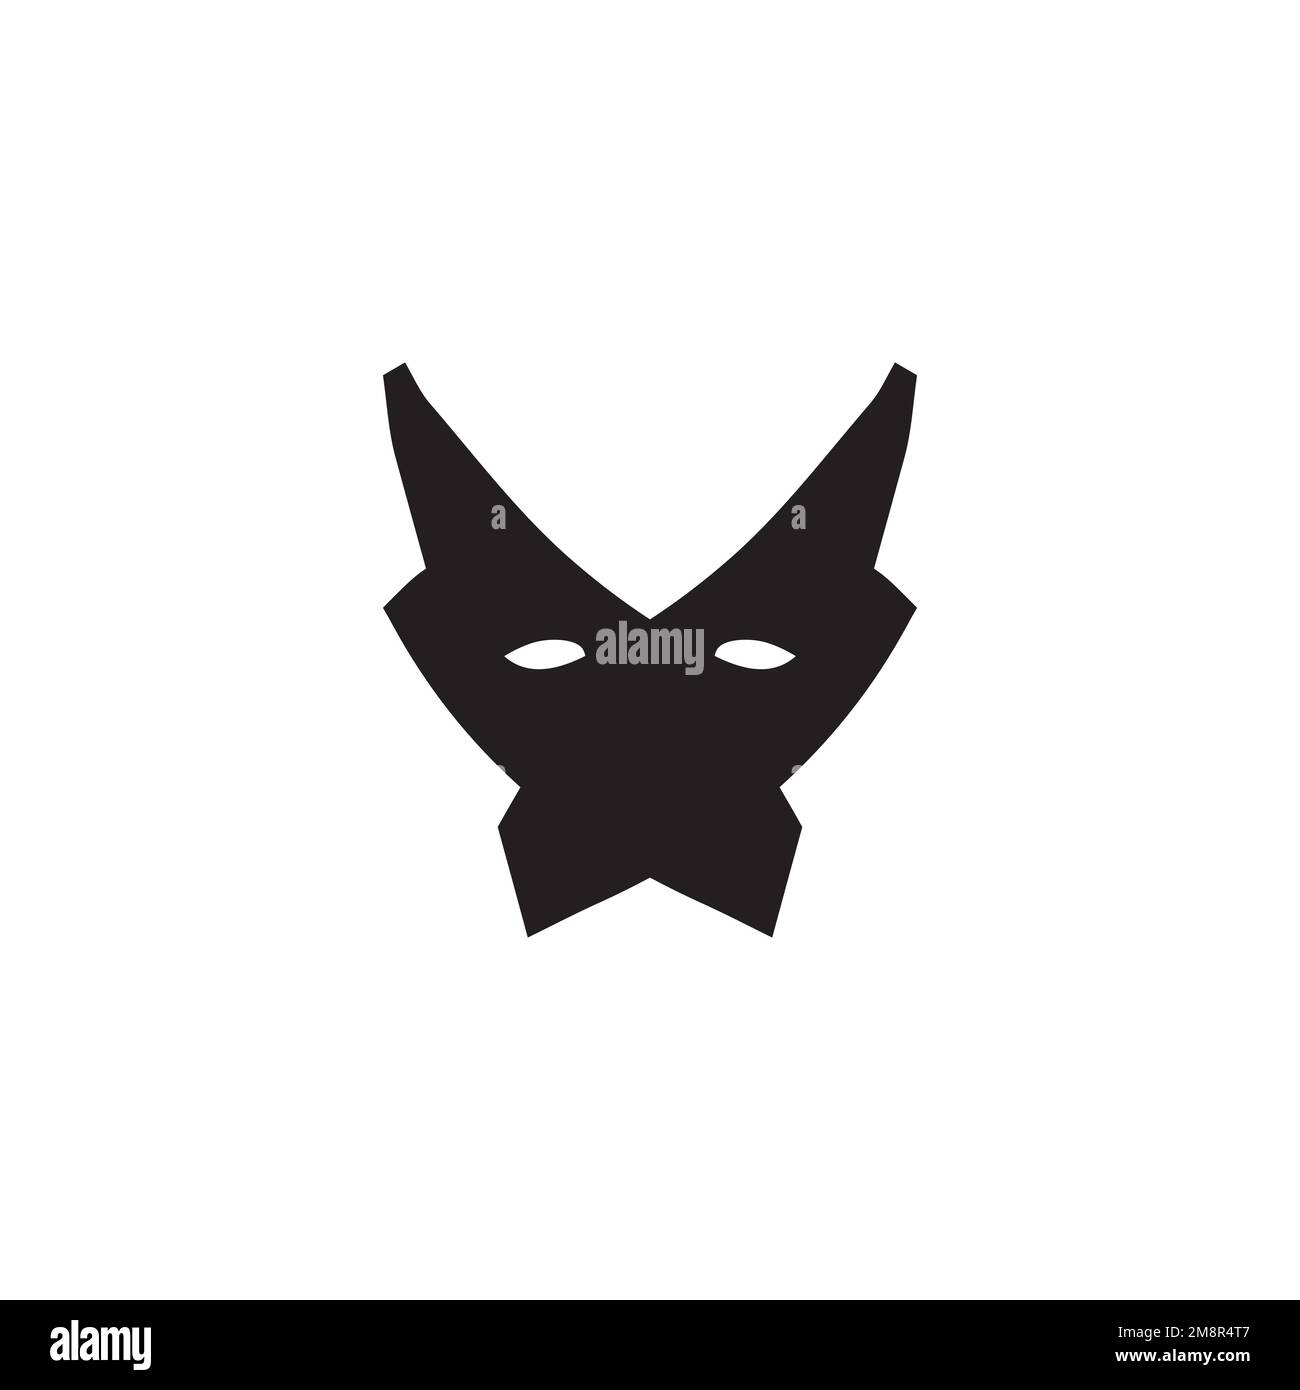 Horror mask icon. Simple style masquerade poster background symbol. Mask brand logo design element. Horror mask T-shirt printing. Vector for sticker. Stock Vector